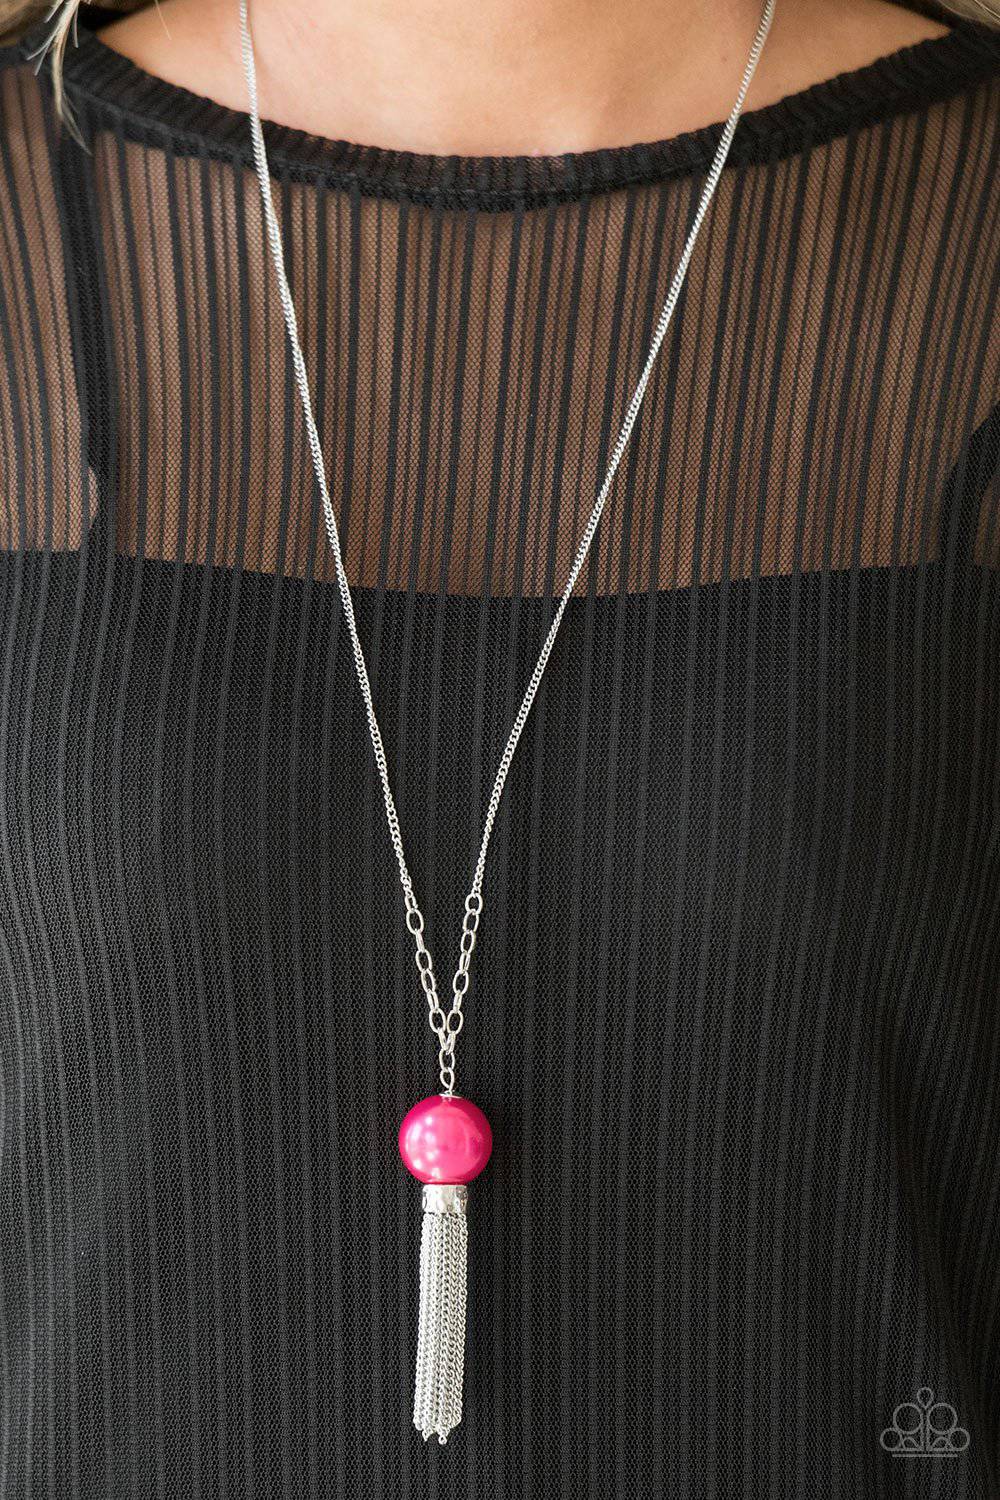 Belle of the BALLROOM - Pink Granita Pearly Necklace - Paparazzi Accessories - GlaMarous Titi Jewels